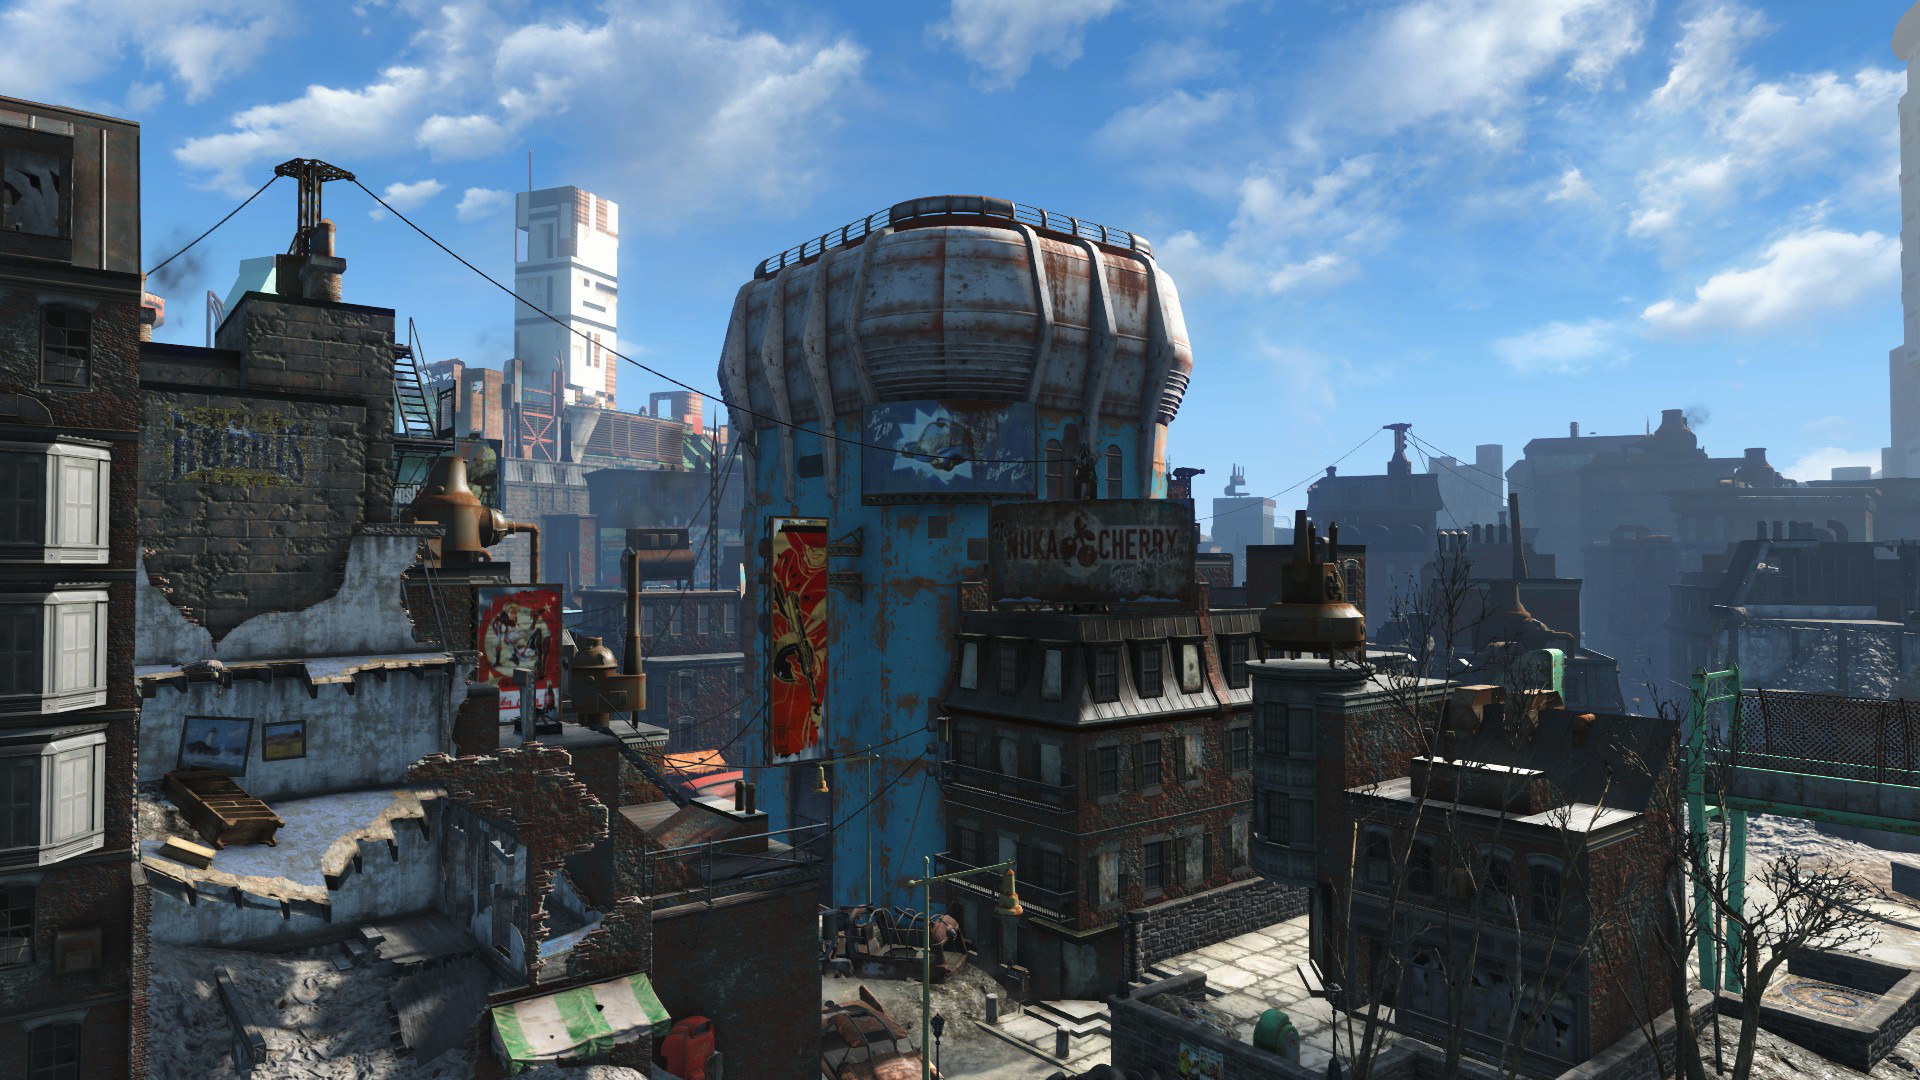 fallout 4 vault tec dlc released today